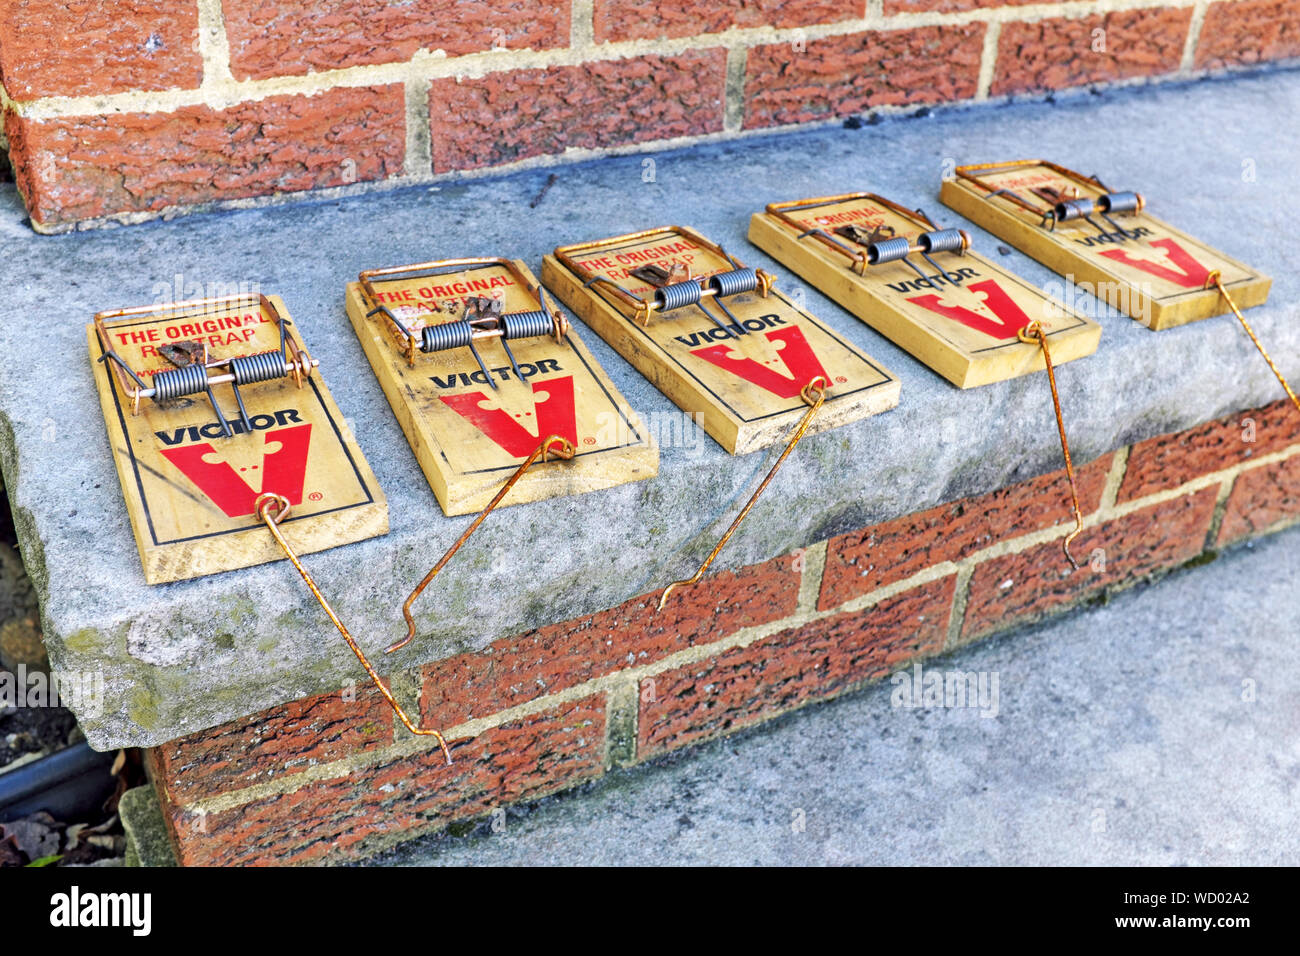 https://c8.alamy.com/comp/WD02A2/five-unset-manual-victor-rat-traps-lined-up-on-steps-ready-to-be-bated-WD02A2.jpg